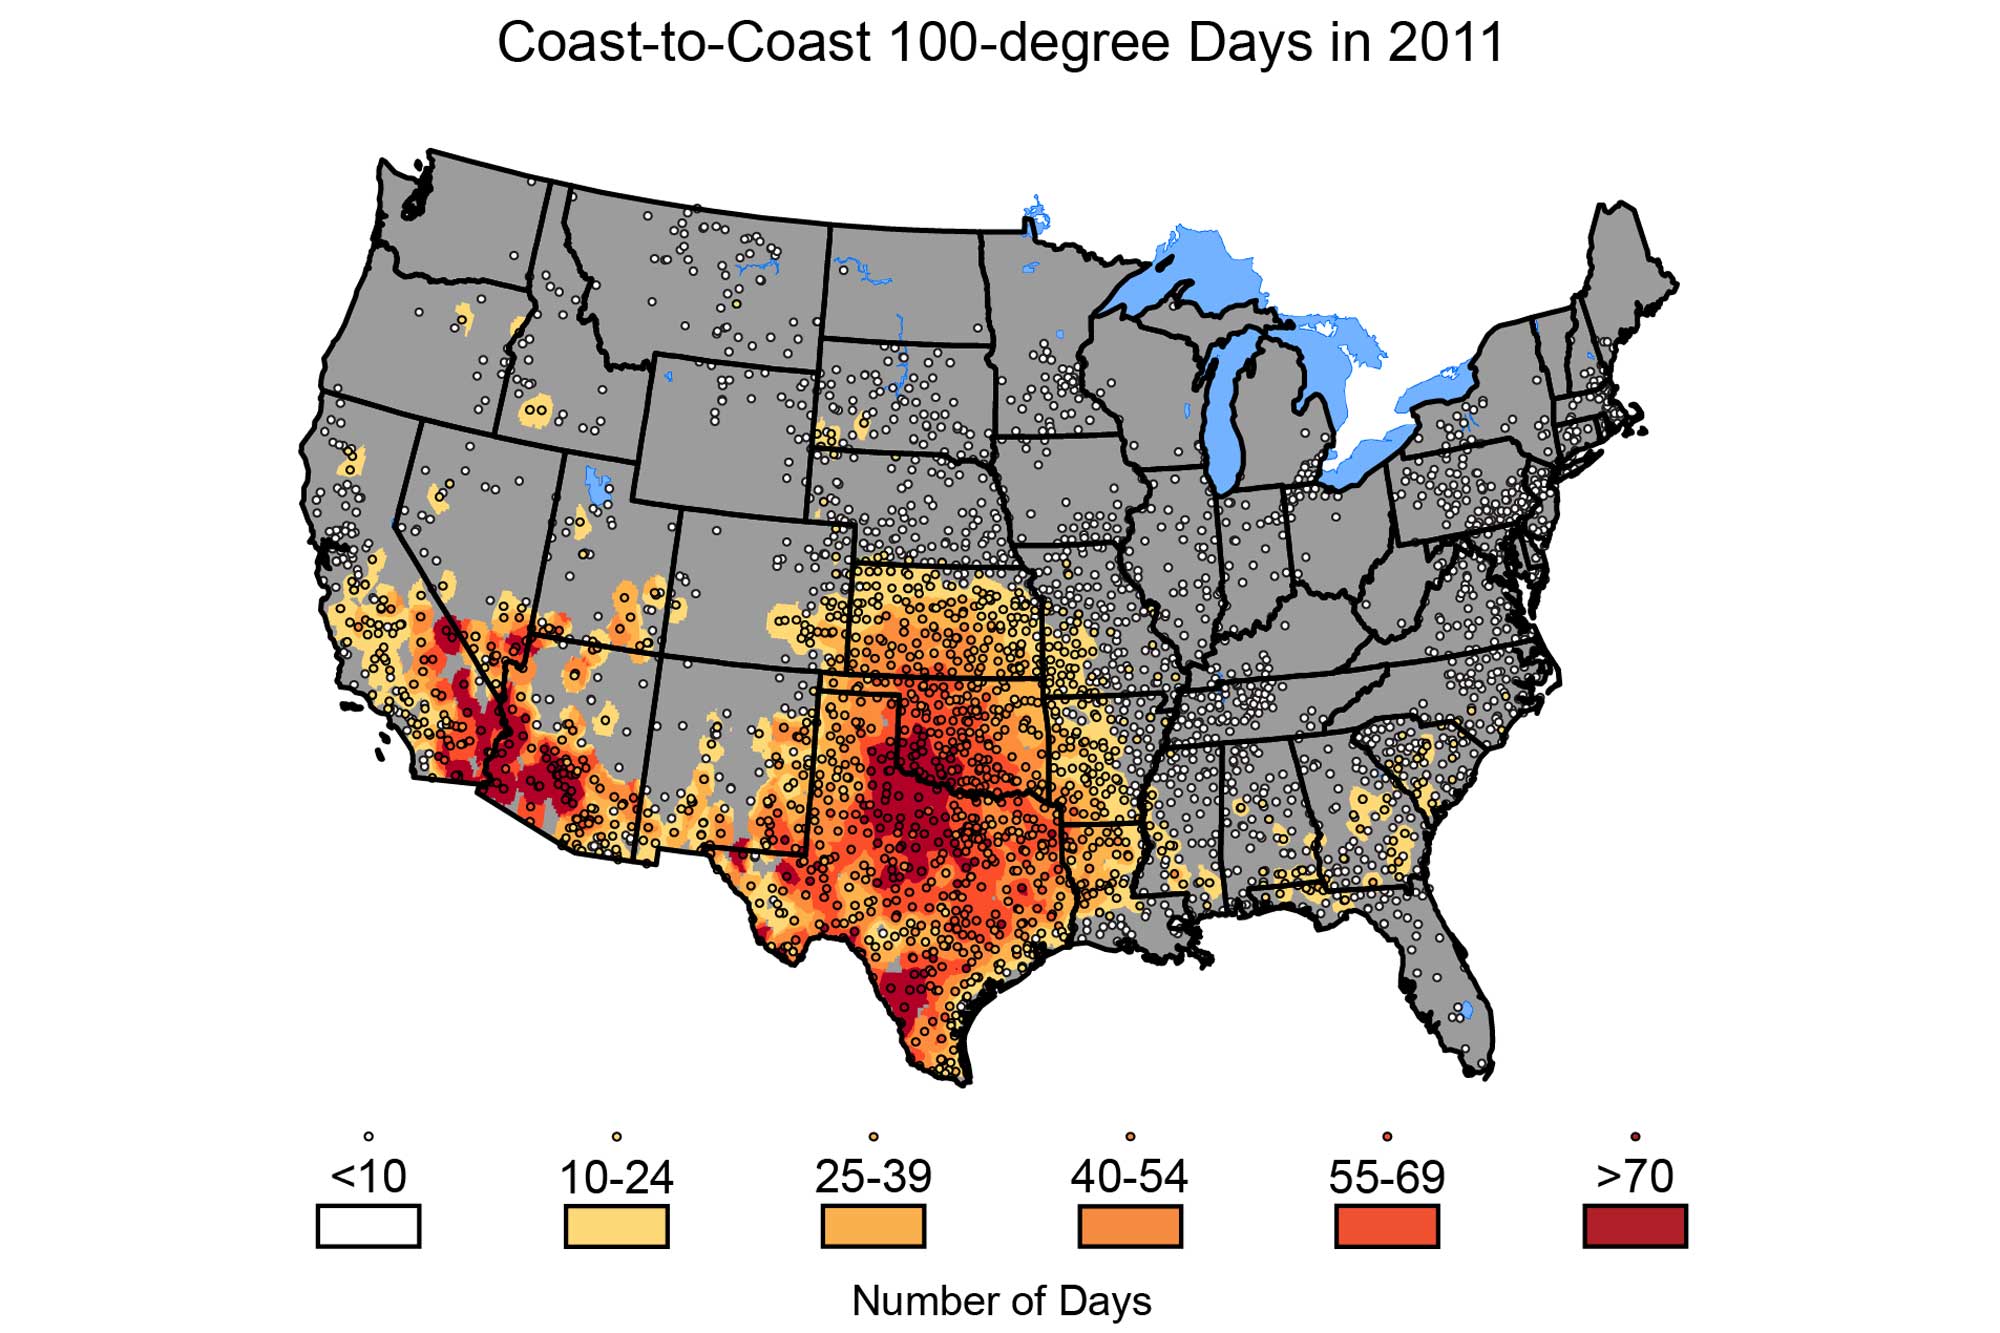 Map of the continental United States showing the number of days in 2011 with temperatures over 100 degrees F.